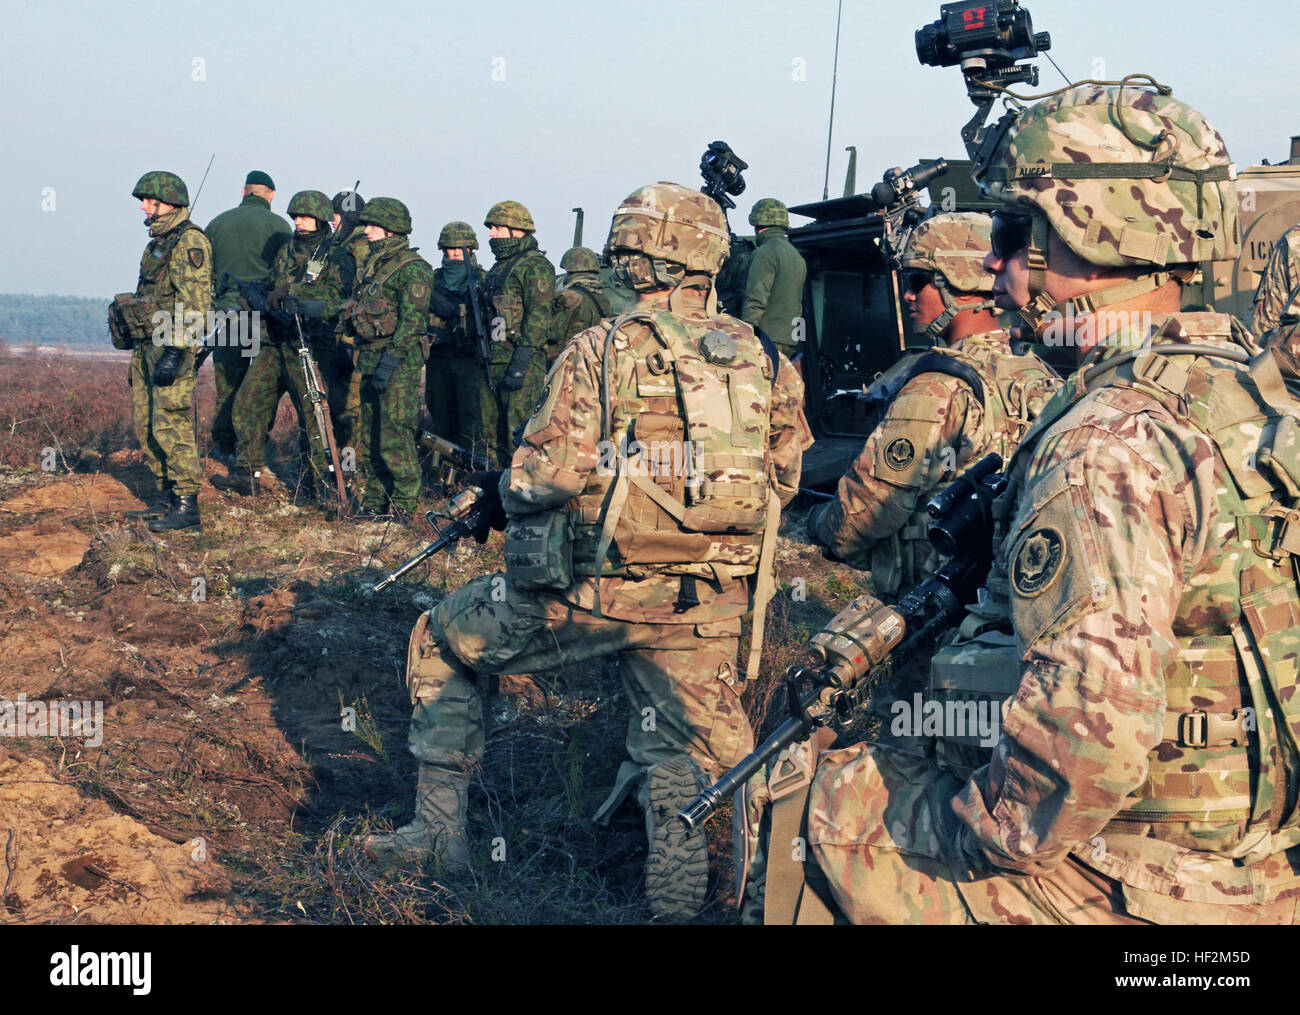 Soldiers assigned to the 1st Brigade Combat Team, 1st Cavalry Division, and their allied partners assigned to the Lithuanian Armed Forces wait to board their vehicles before participating in a combined arms live-fire exercise that demonstrated joint fire capability and maneuvering across firing lines at a military installation near Pabrade, Lithuania, Oct. 30, 2014. These activities are part of the U.S. Army Europe-led Operation Atlantic Resolve land force assurance training taking place across Estonia, Latvia, Lithuania and Poland to enhance multinational interoperability, strengthen relation Stock Photo